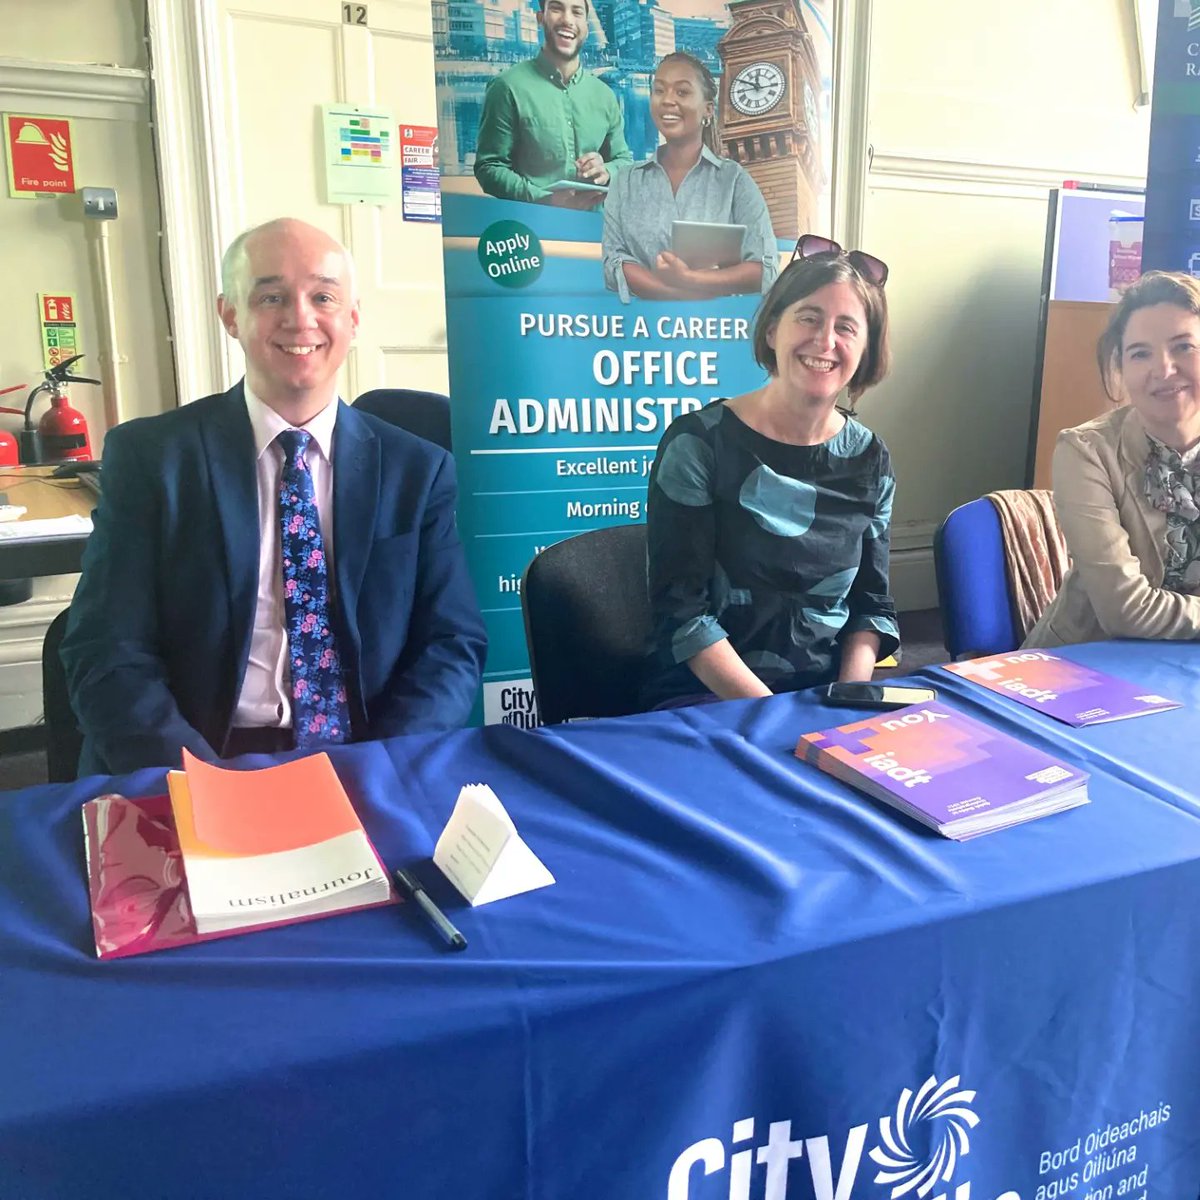 Thank you to Dr Kevin Hora (TU Dublin) Dr Irene McCormick (SETU Carlow) and Dr Maria Parsons (IADT) for their very engaging and informative talks during our Arts and Media progression event. @RathminesCFE 🗣️👏👏 #fullhouse #openday #artsandmedia #progression #educationtalks